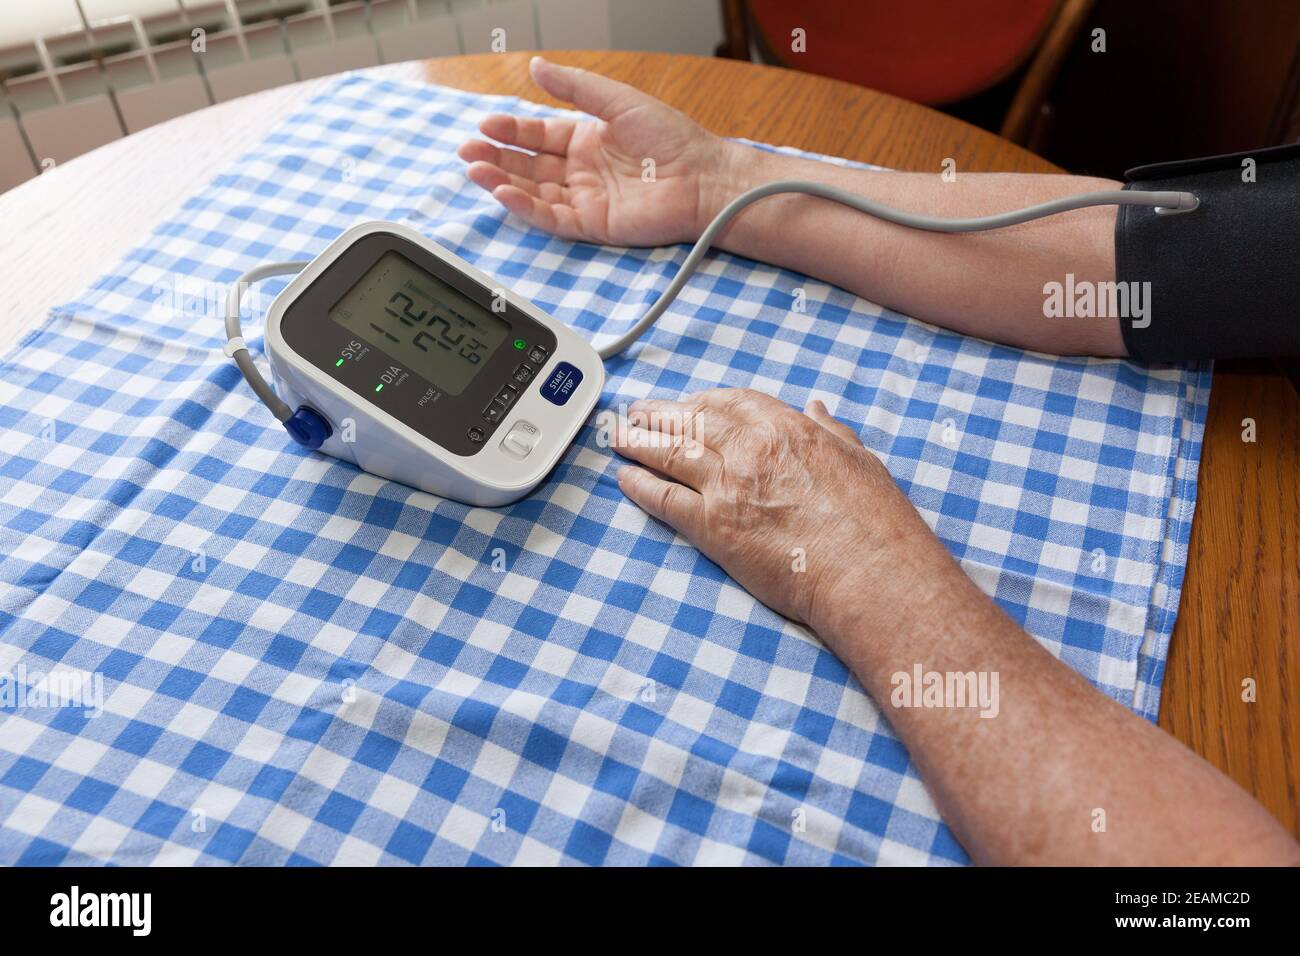 https://c8.alamy.com/comp/2EAMC2D/blood-pressure-measure-with-heart-rate-check-using-digital-device-healthcare-and-medical-concept-2EAMC2D.jpg